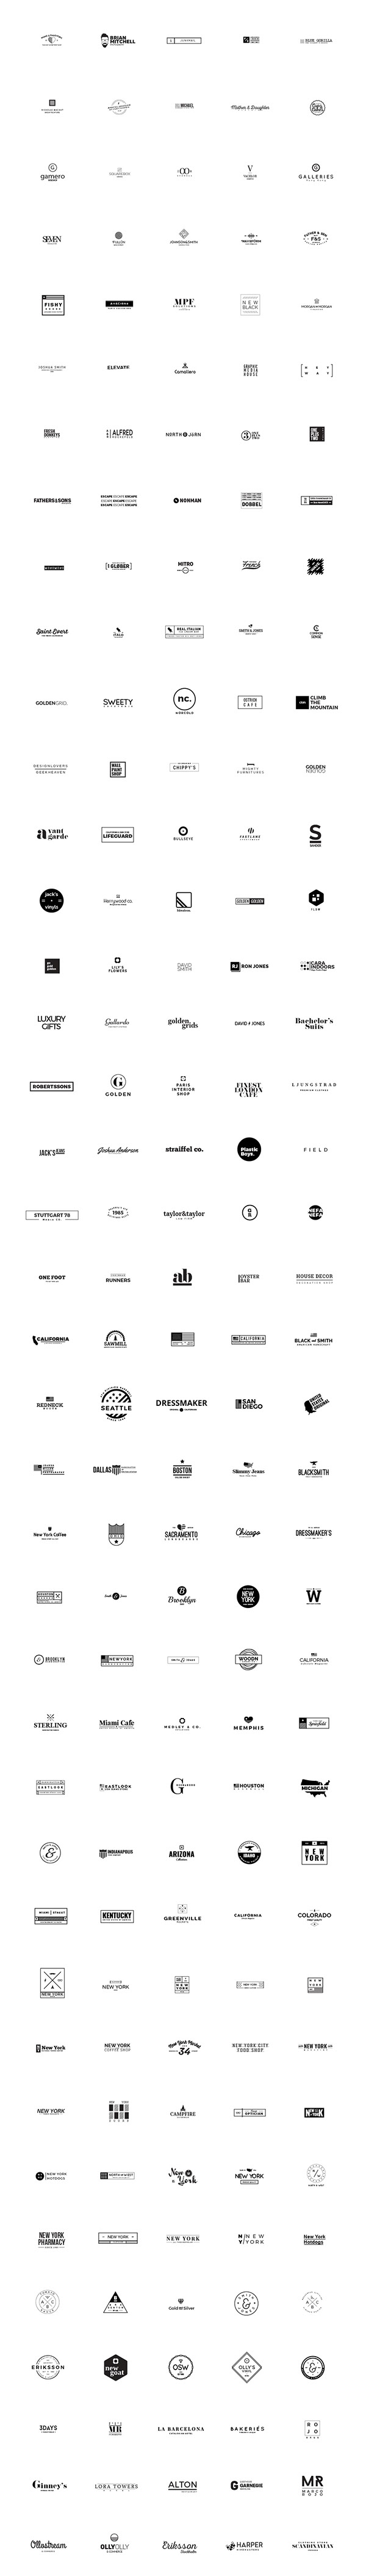 200 Logos in 2 Months | May - July 2015